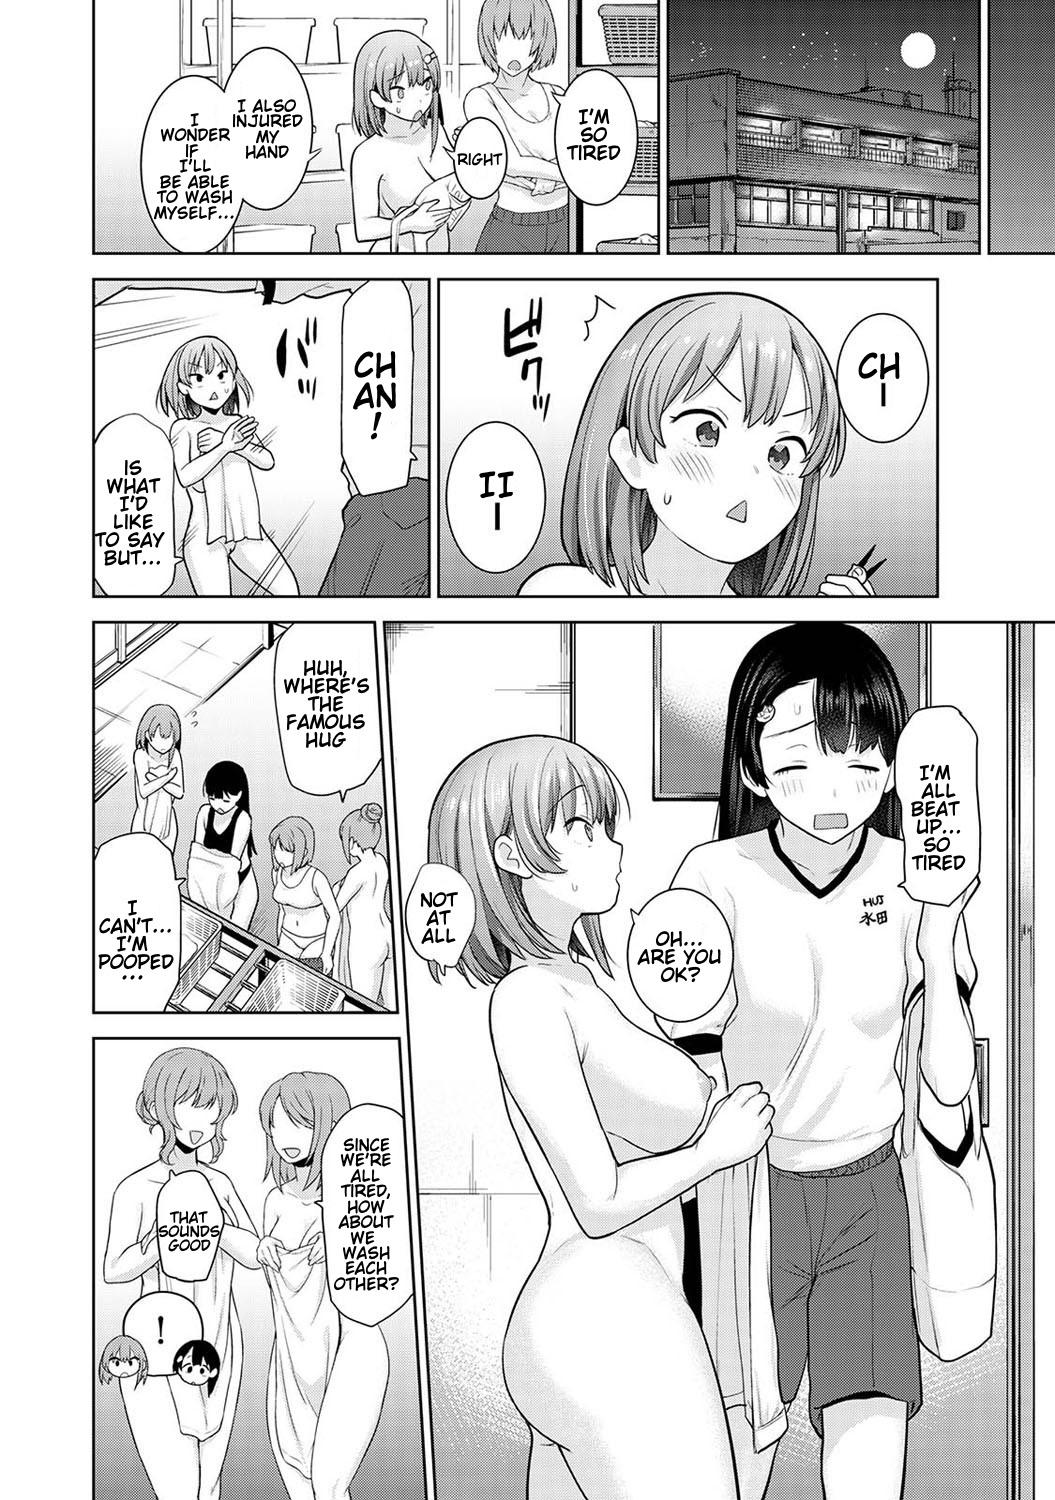 SotsuAl Cameraman to Shite Ichinenkan Joshikou no Event e Doukou Suru Koto ni Natta Hanashi | A Story About How I Ended Up Being A Yearbook Cameraman at an All Girls' School For A Year Ch. 6 21